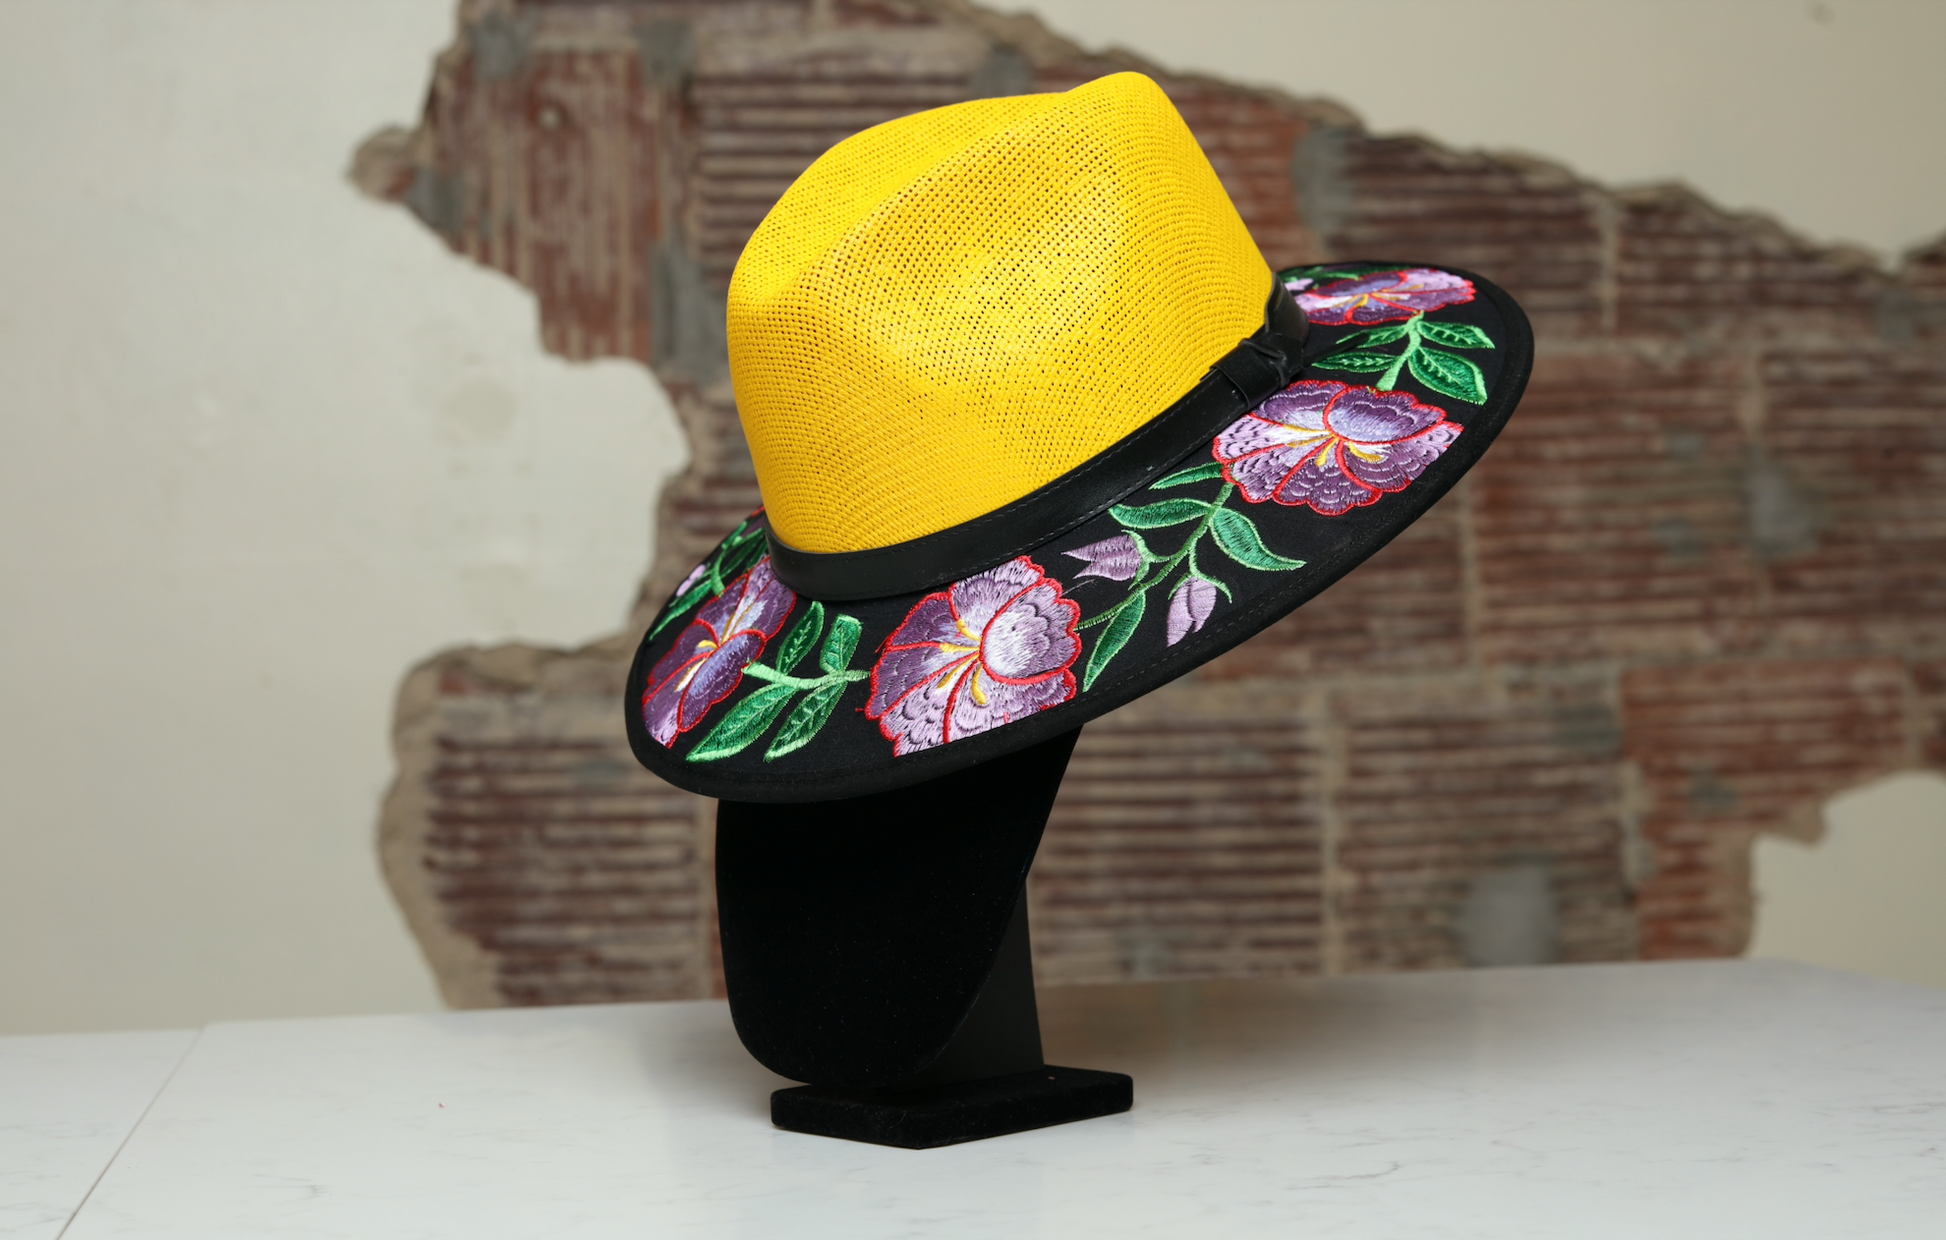 Hand embroidered yellow brimmed hat, the perfect accessory to add fun and style to any outfit. With purple flowers and green leaves as multicultural embellishments.